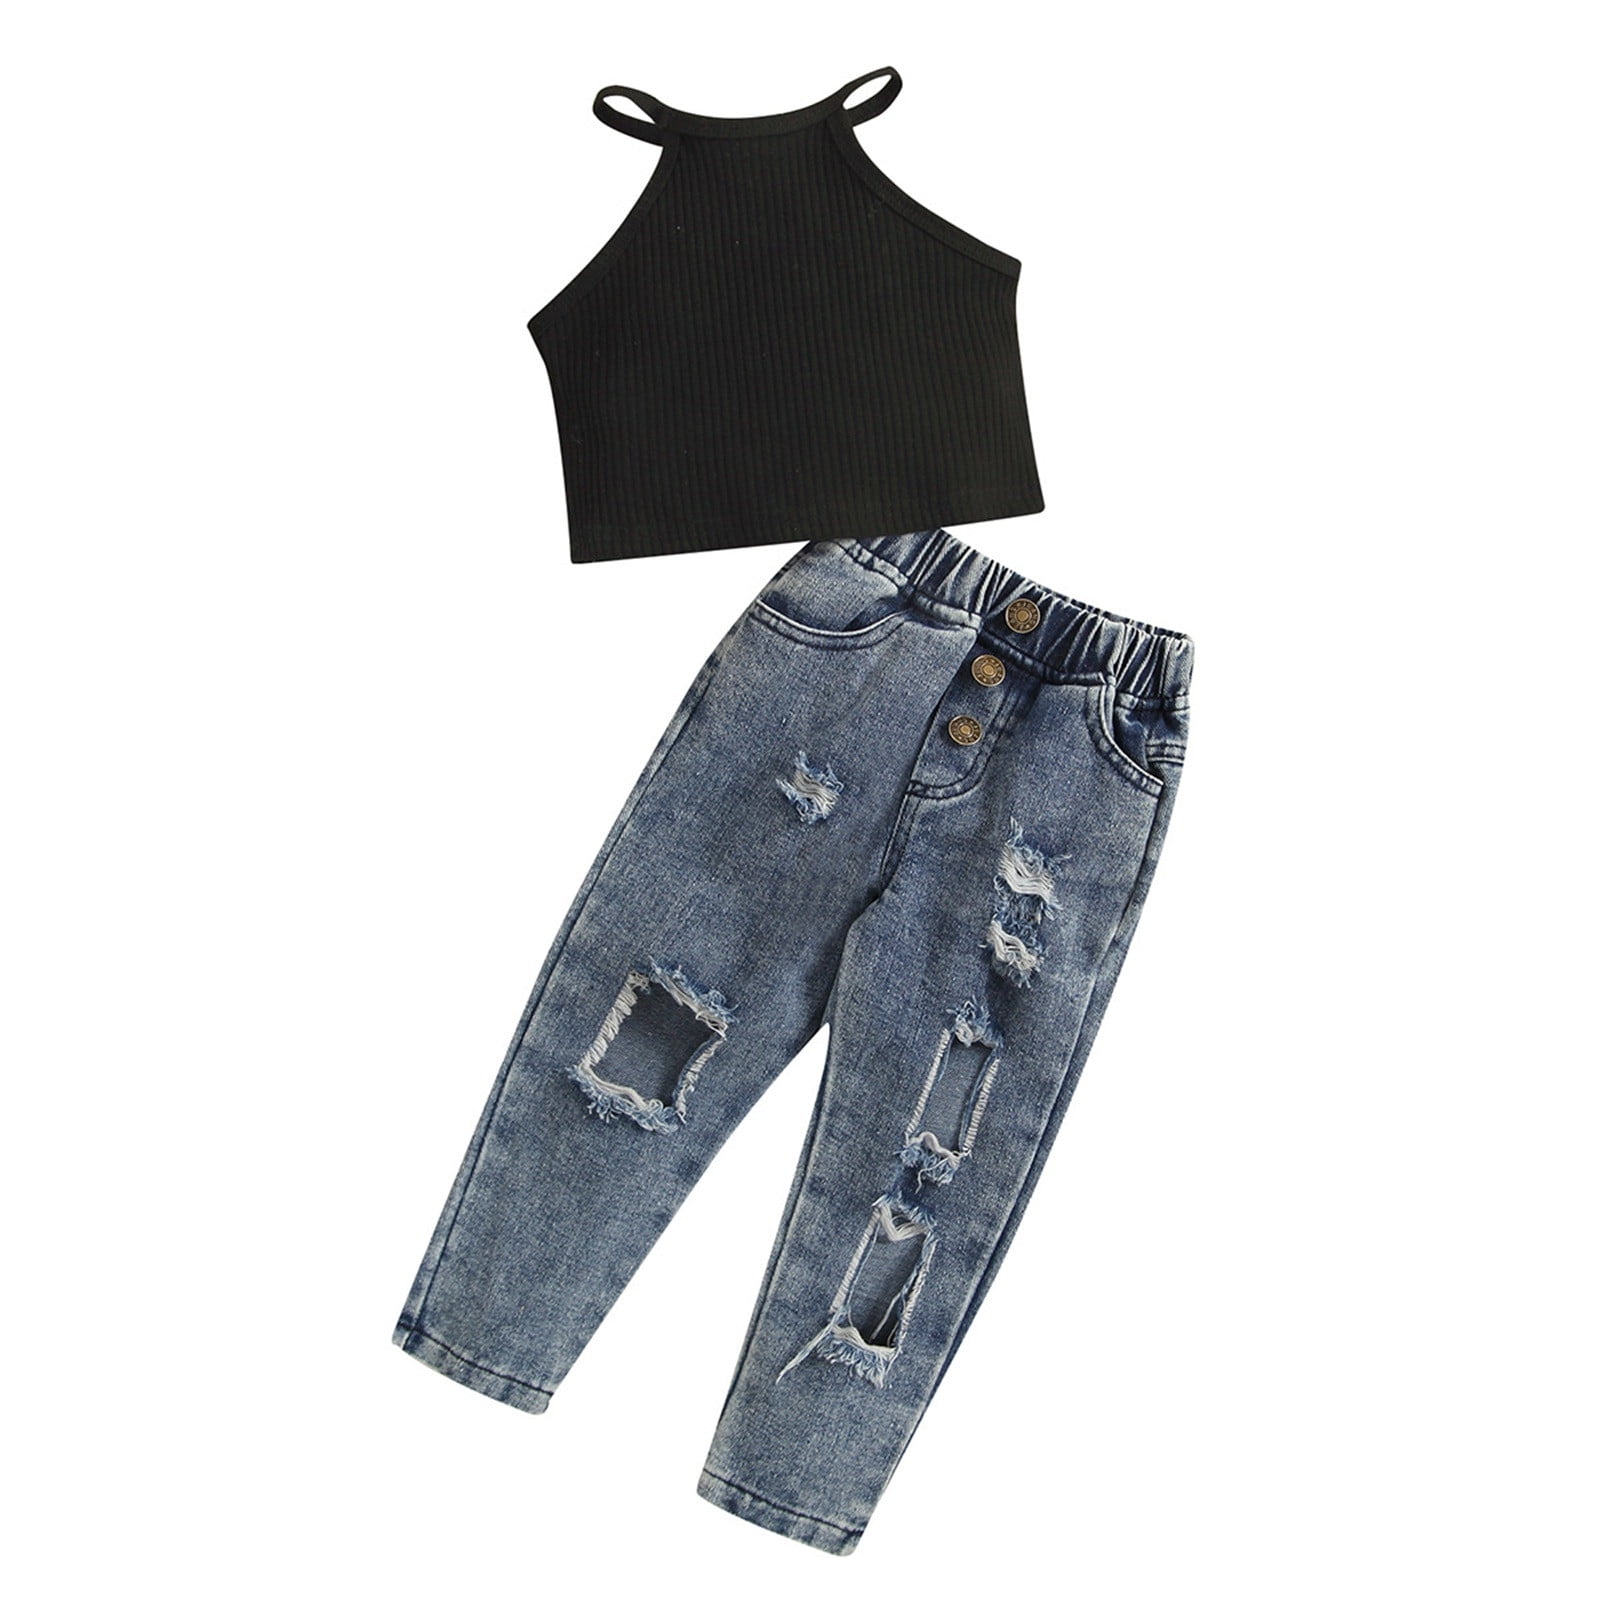 Buy Jeans Top For Girls Online In India At Best Prices | Tata CLiQ-saigonsouth.com.vn